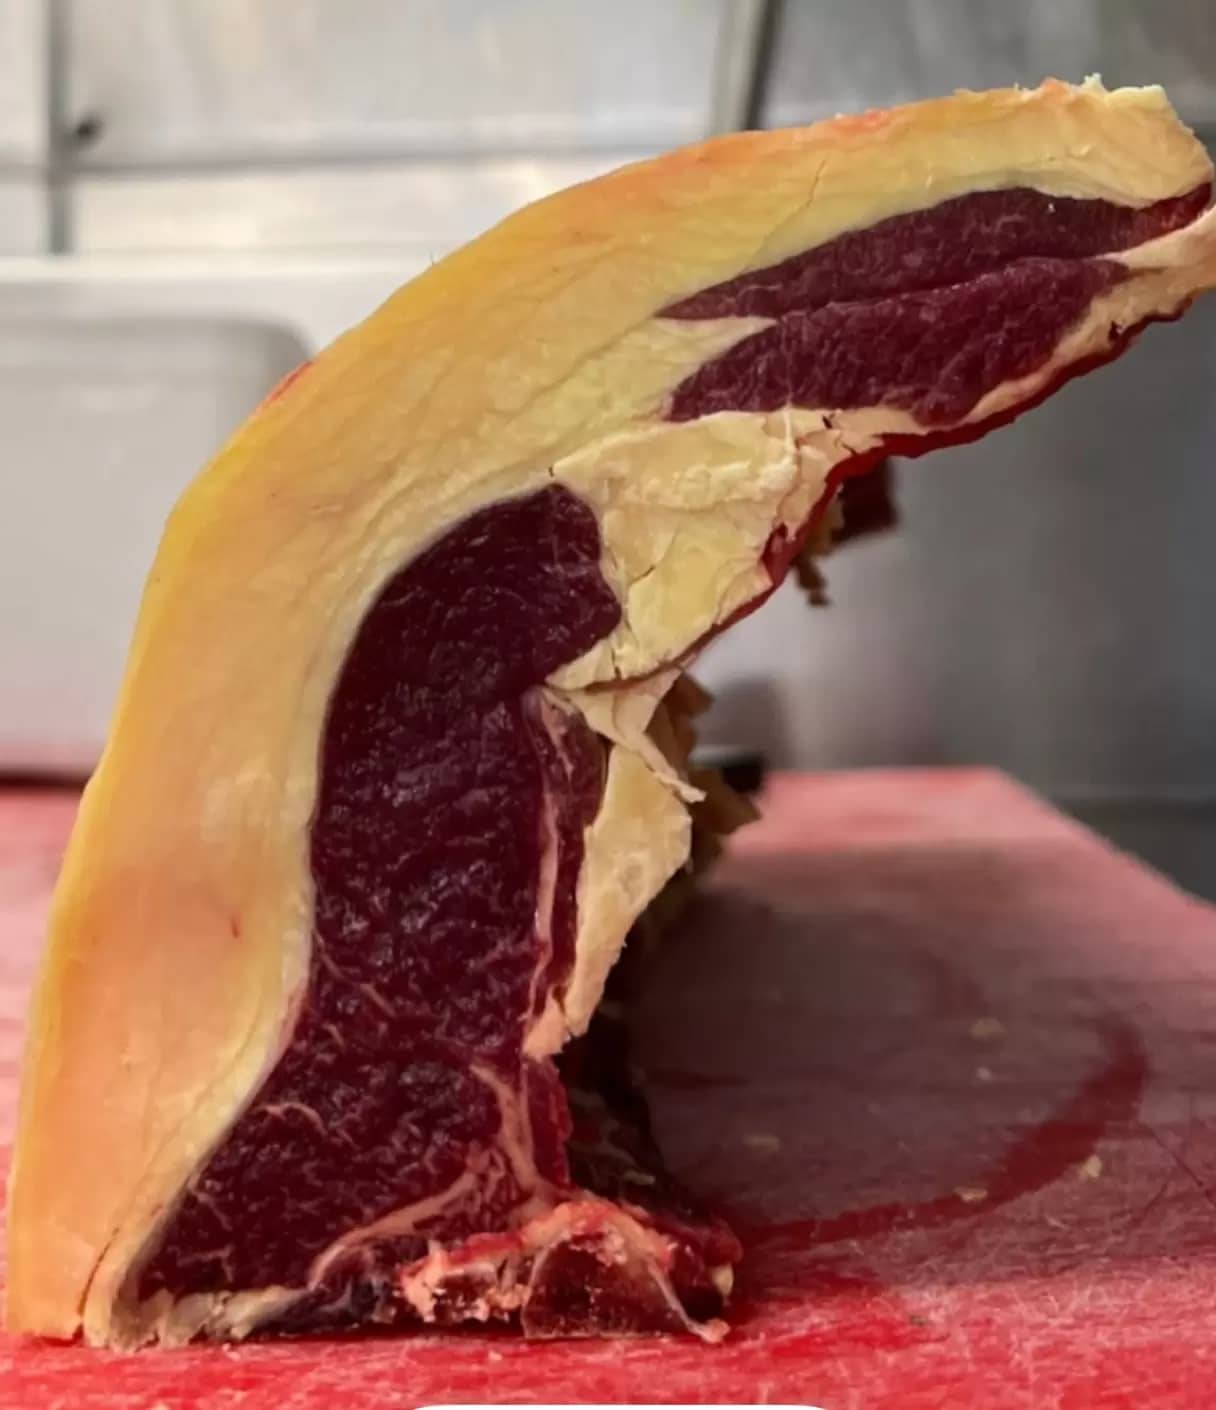 Inside every old UK sheep there is potentiality a world class bit of meat. This one has retained the genes that make pigments go yellow when fed grass. Dark, dark red meat. Fat like butter. Aged to perfection. Not much marbling. Sent to @Mangal2 a let’s see what they do with it!